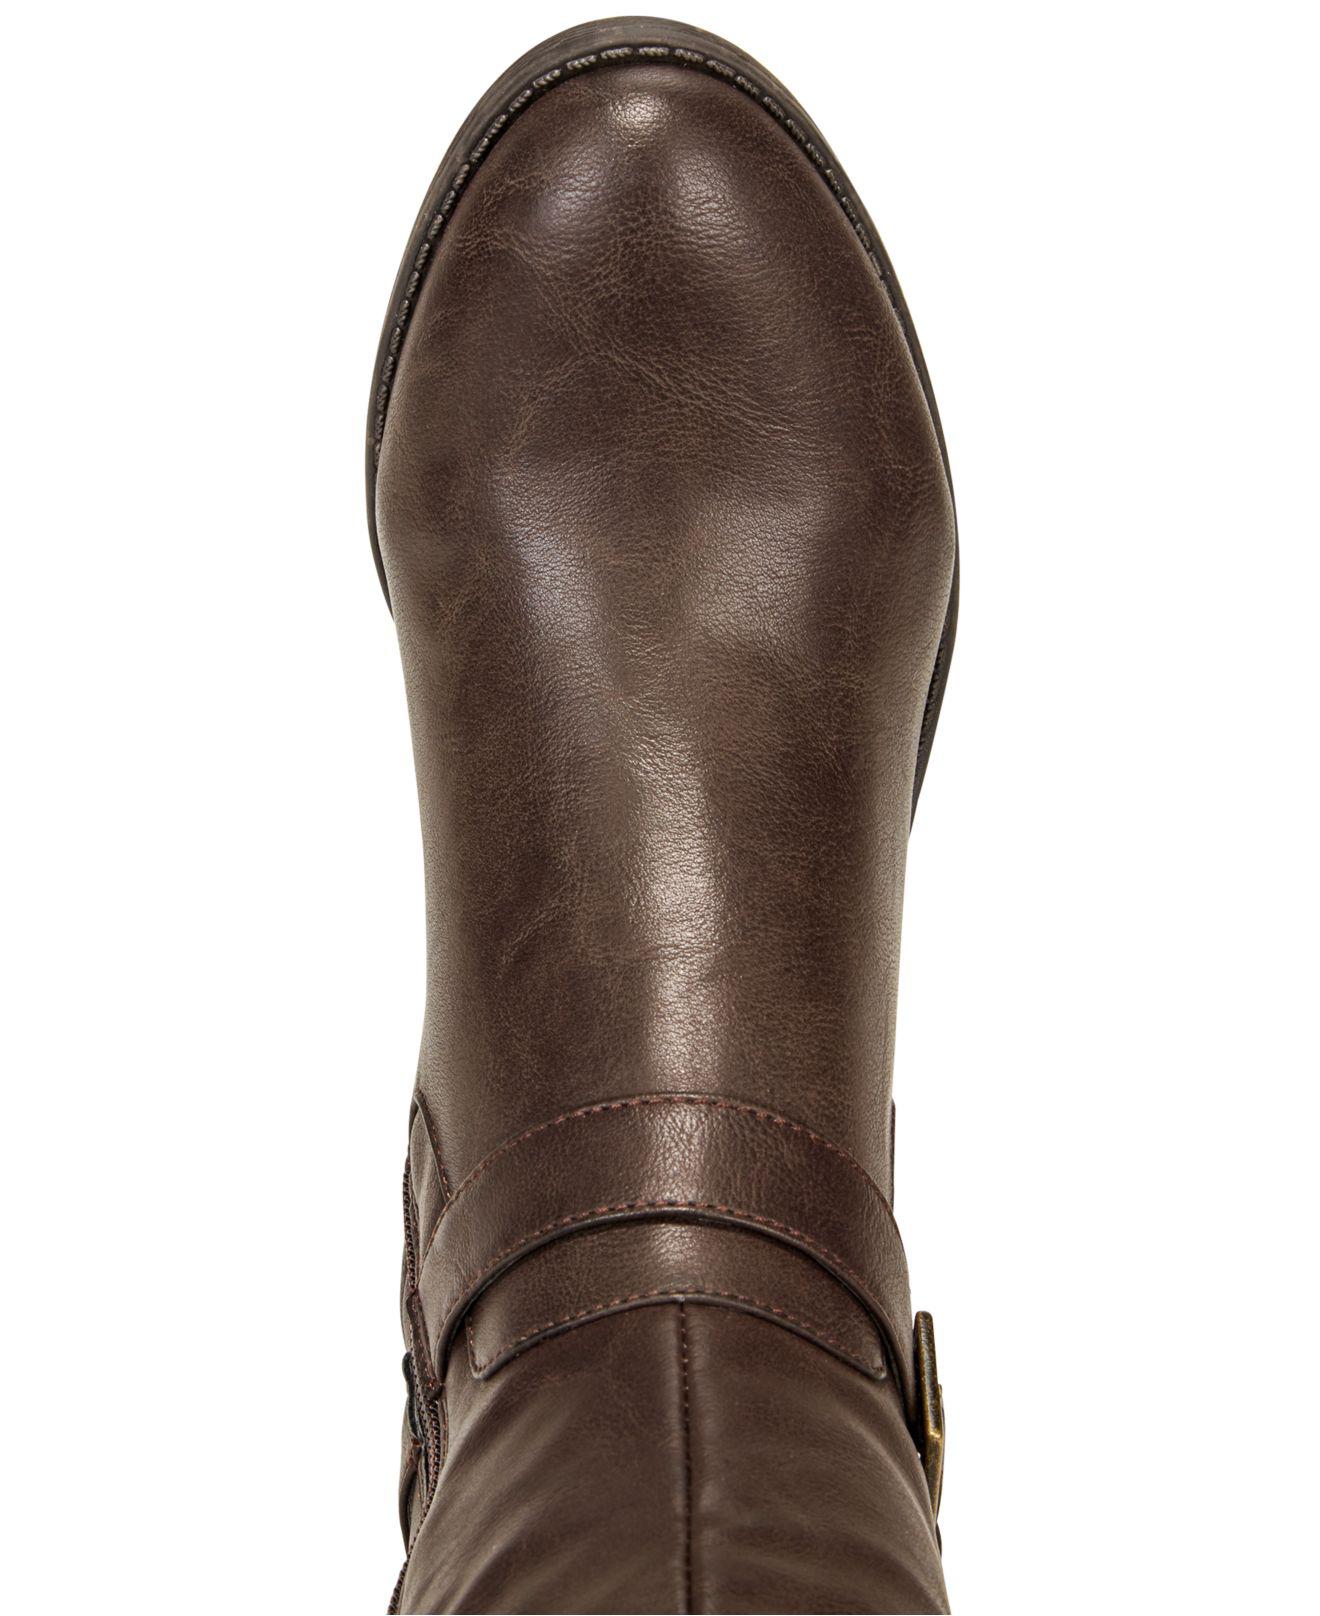 style & co luciaa riding boots